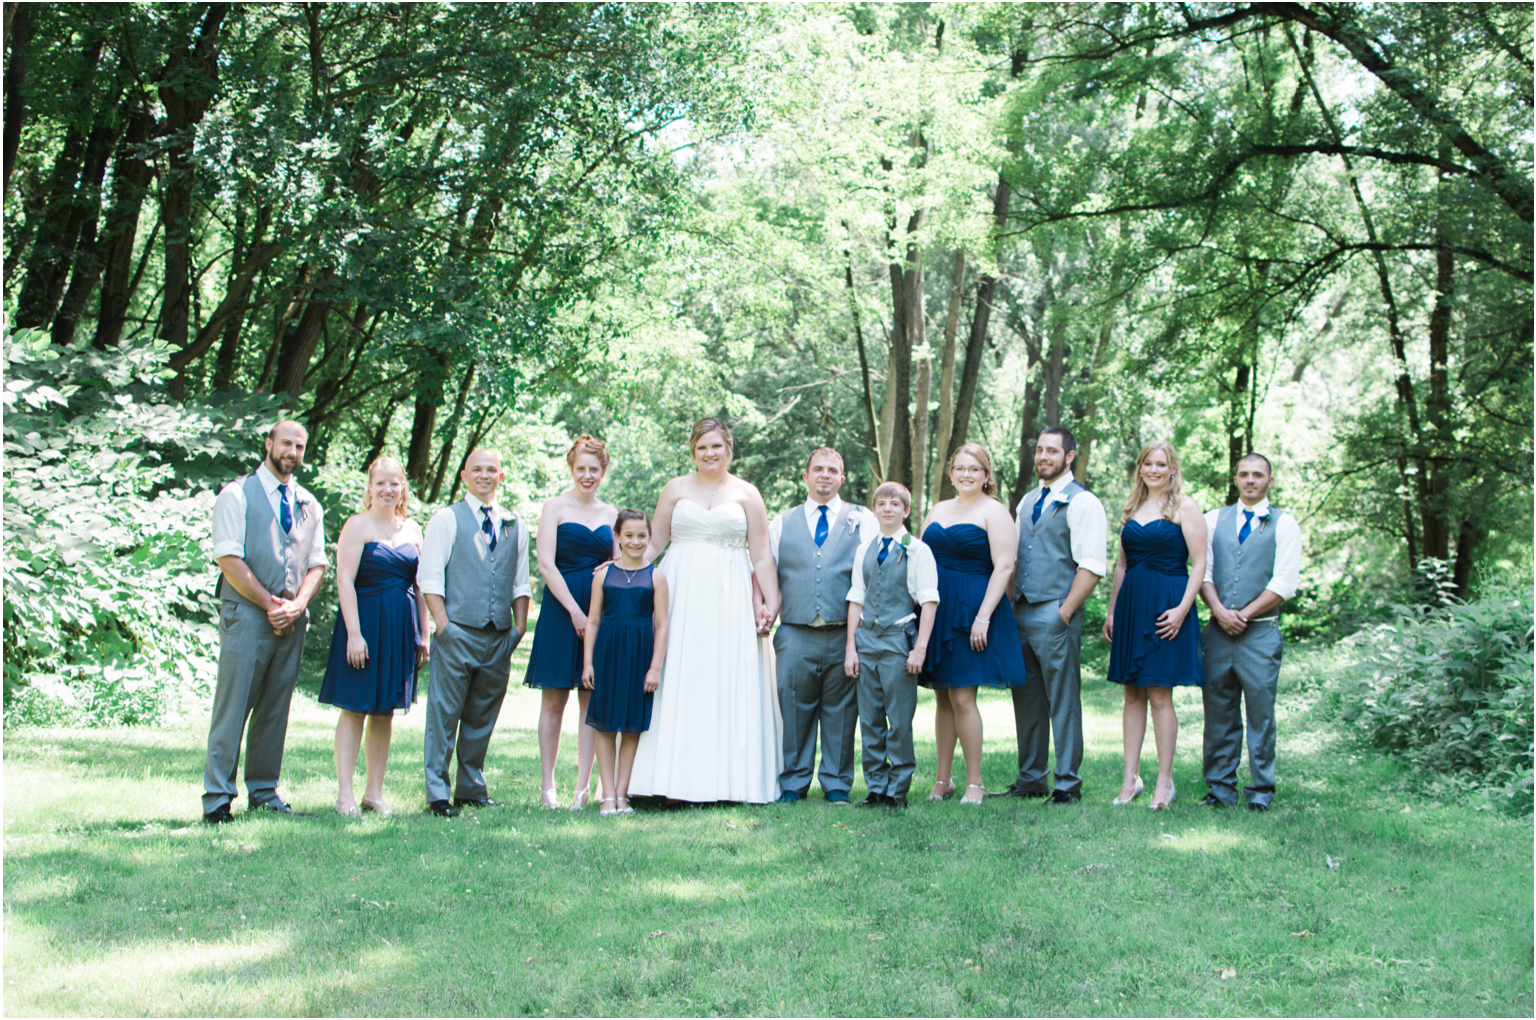 Married details groomsmen photography williamsport PA bridal party